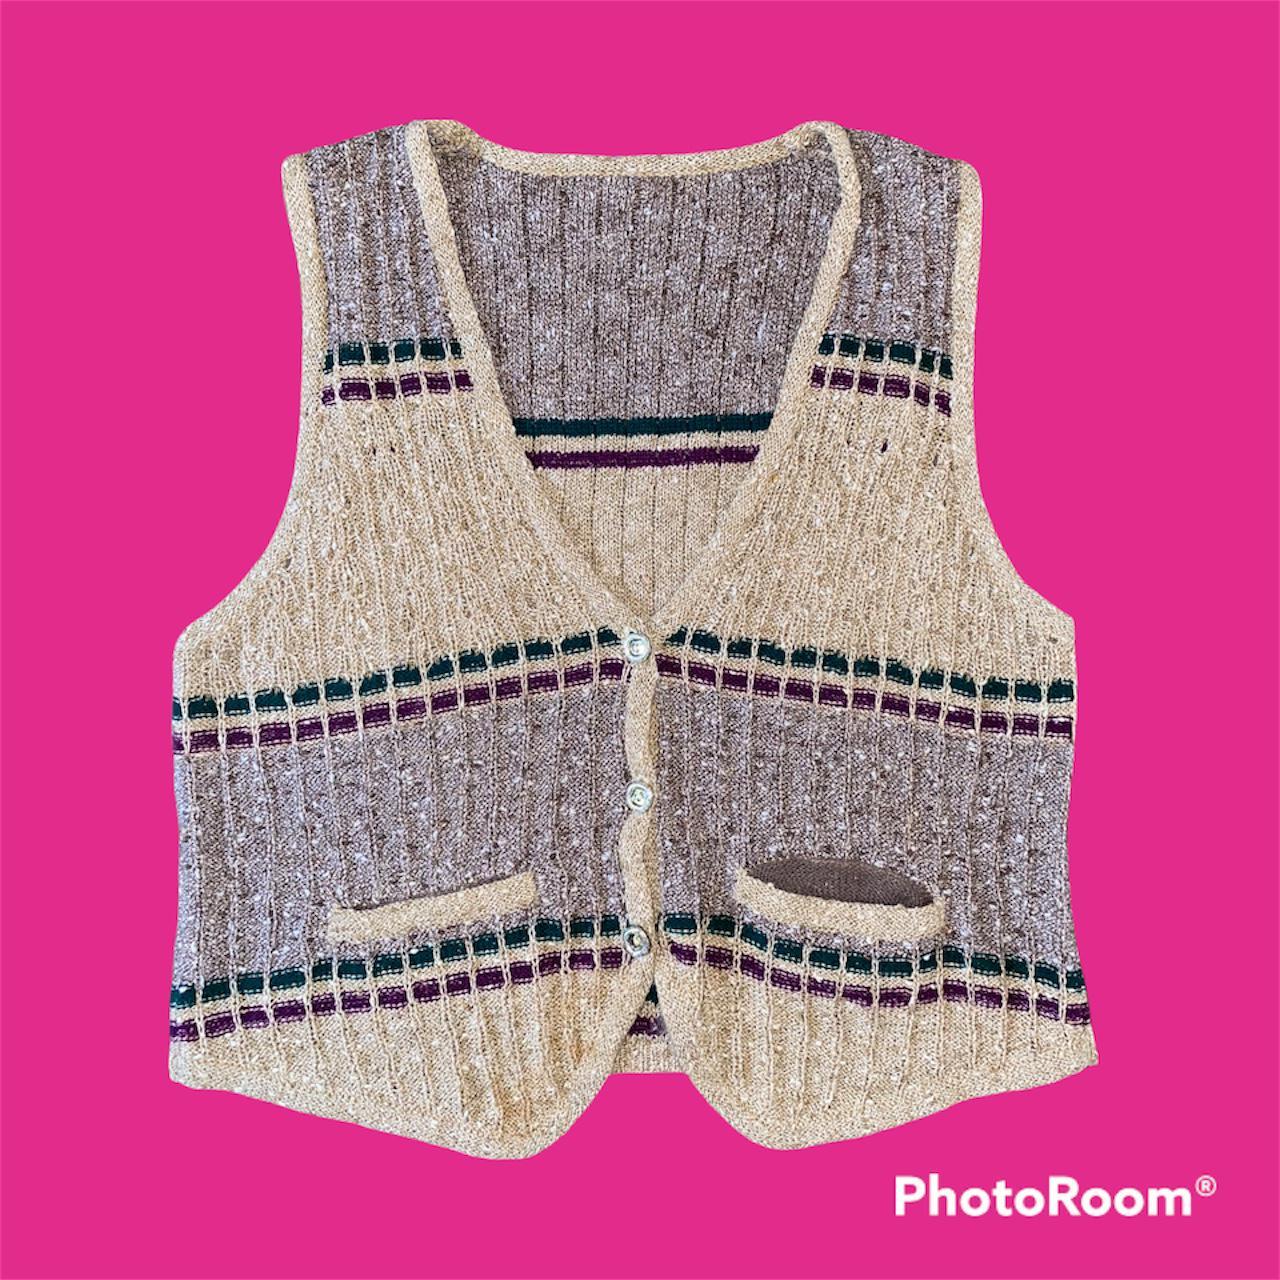 Product Image 1 - Sparkly cream sweater vest with